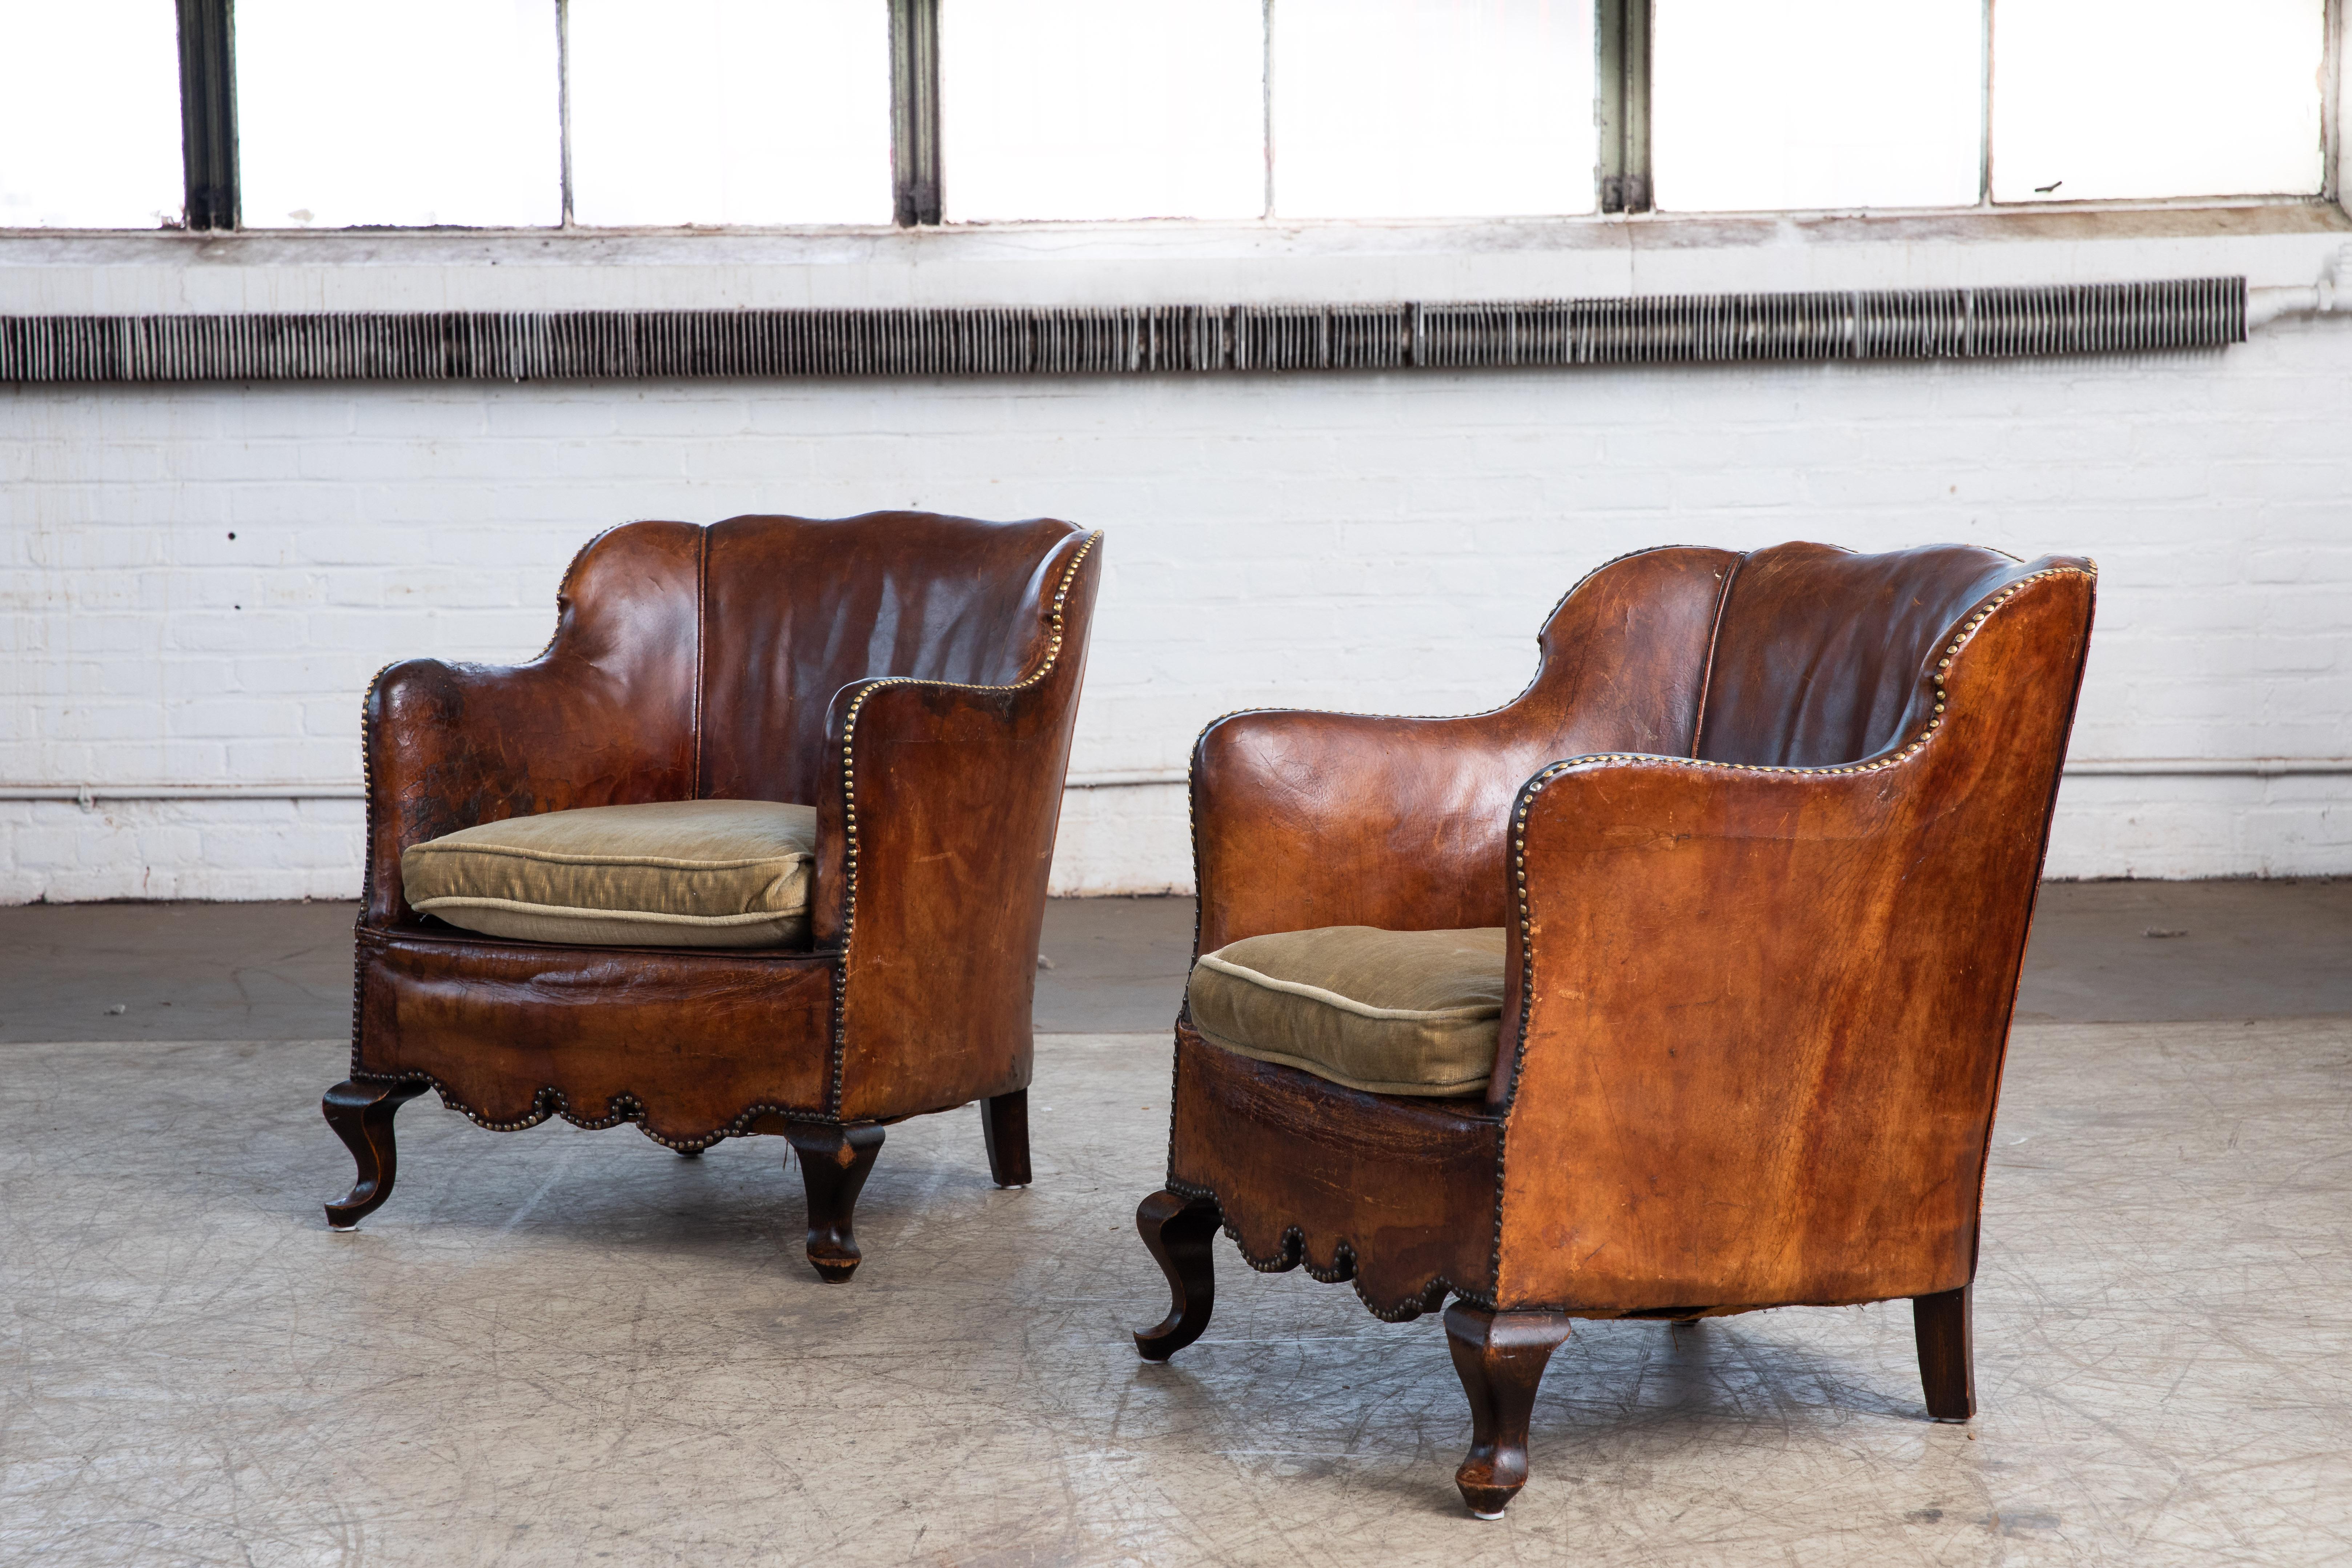 Charming pair of small scale Danish club armchairs attributed to Danish Furniture Maker Oskar Hansen made around the mid-1930s. Covered in original cognac brown leather with a smooth back and brass nail accents. Fantastic color and a lot of noble